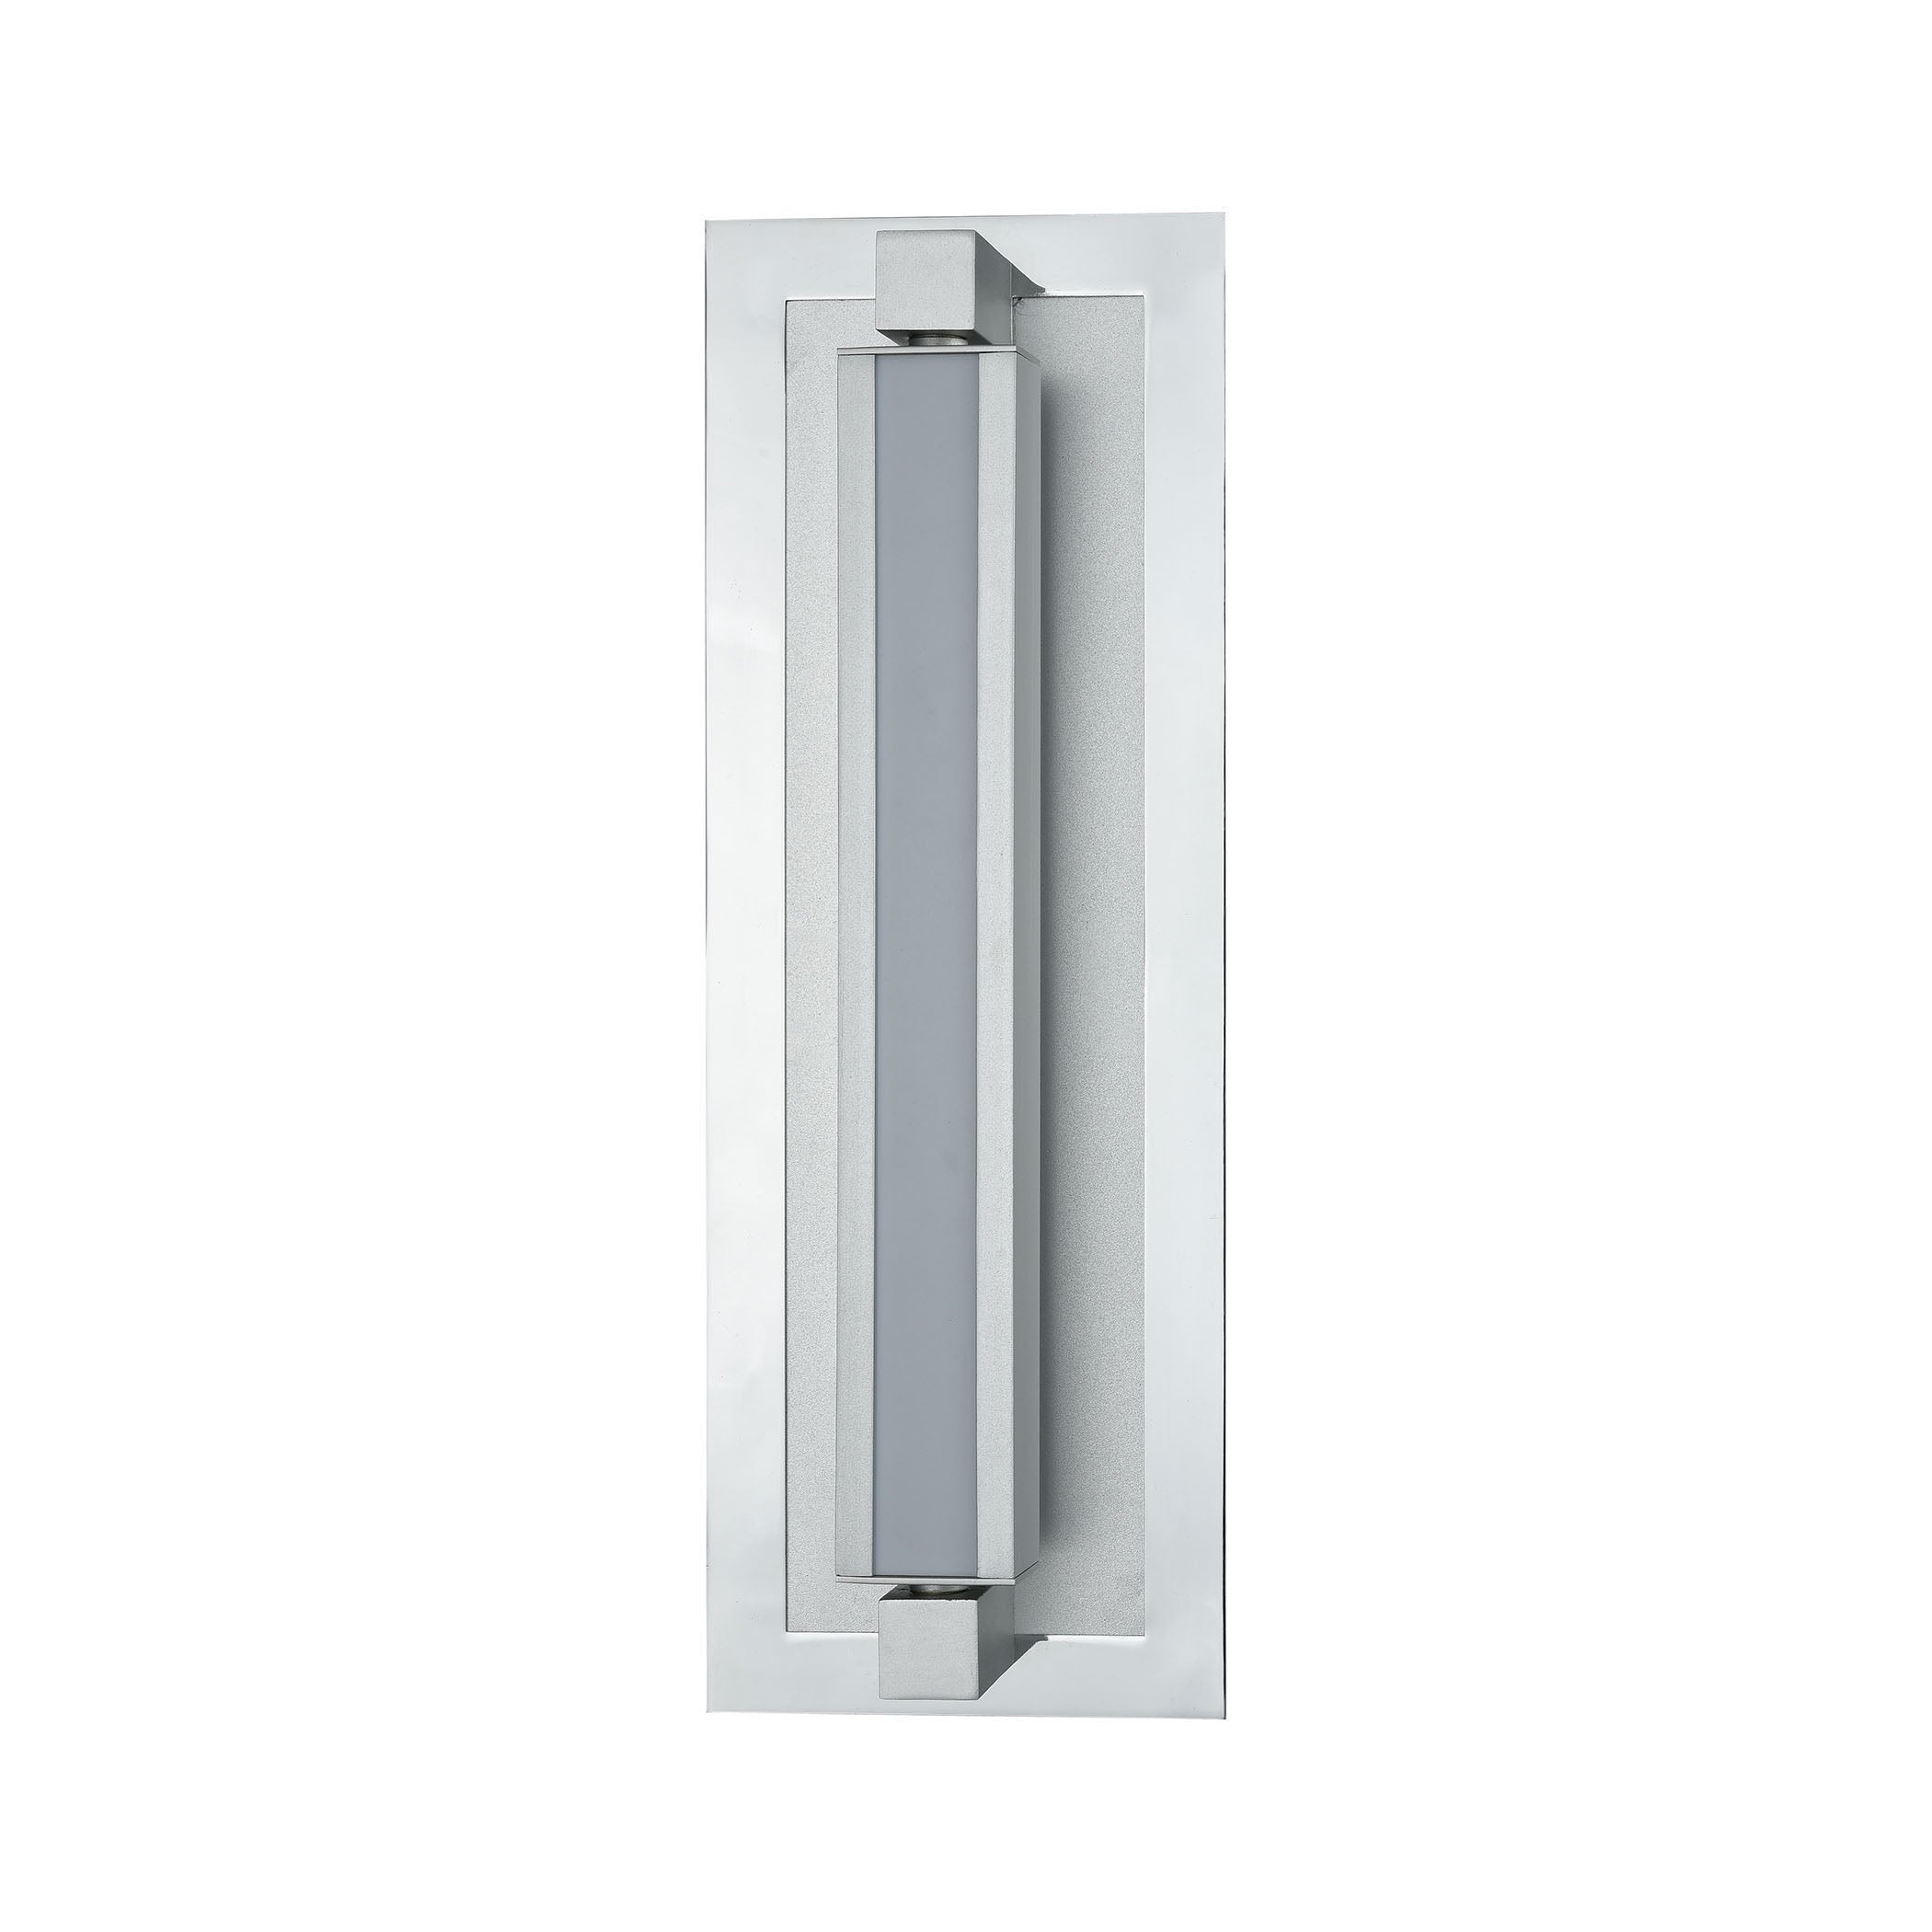 ELK Lighting 85120/LED Kiara 1-Light Vanity Sconce in Frosted and Polished Nickel and Satin Aluminum - Integrated LED